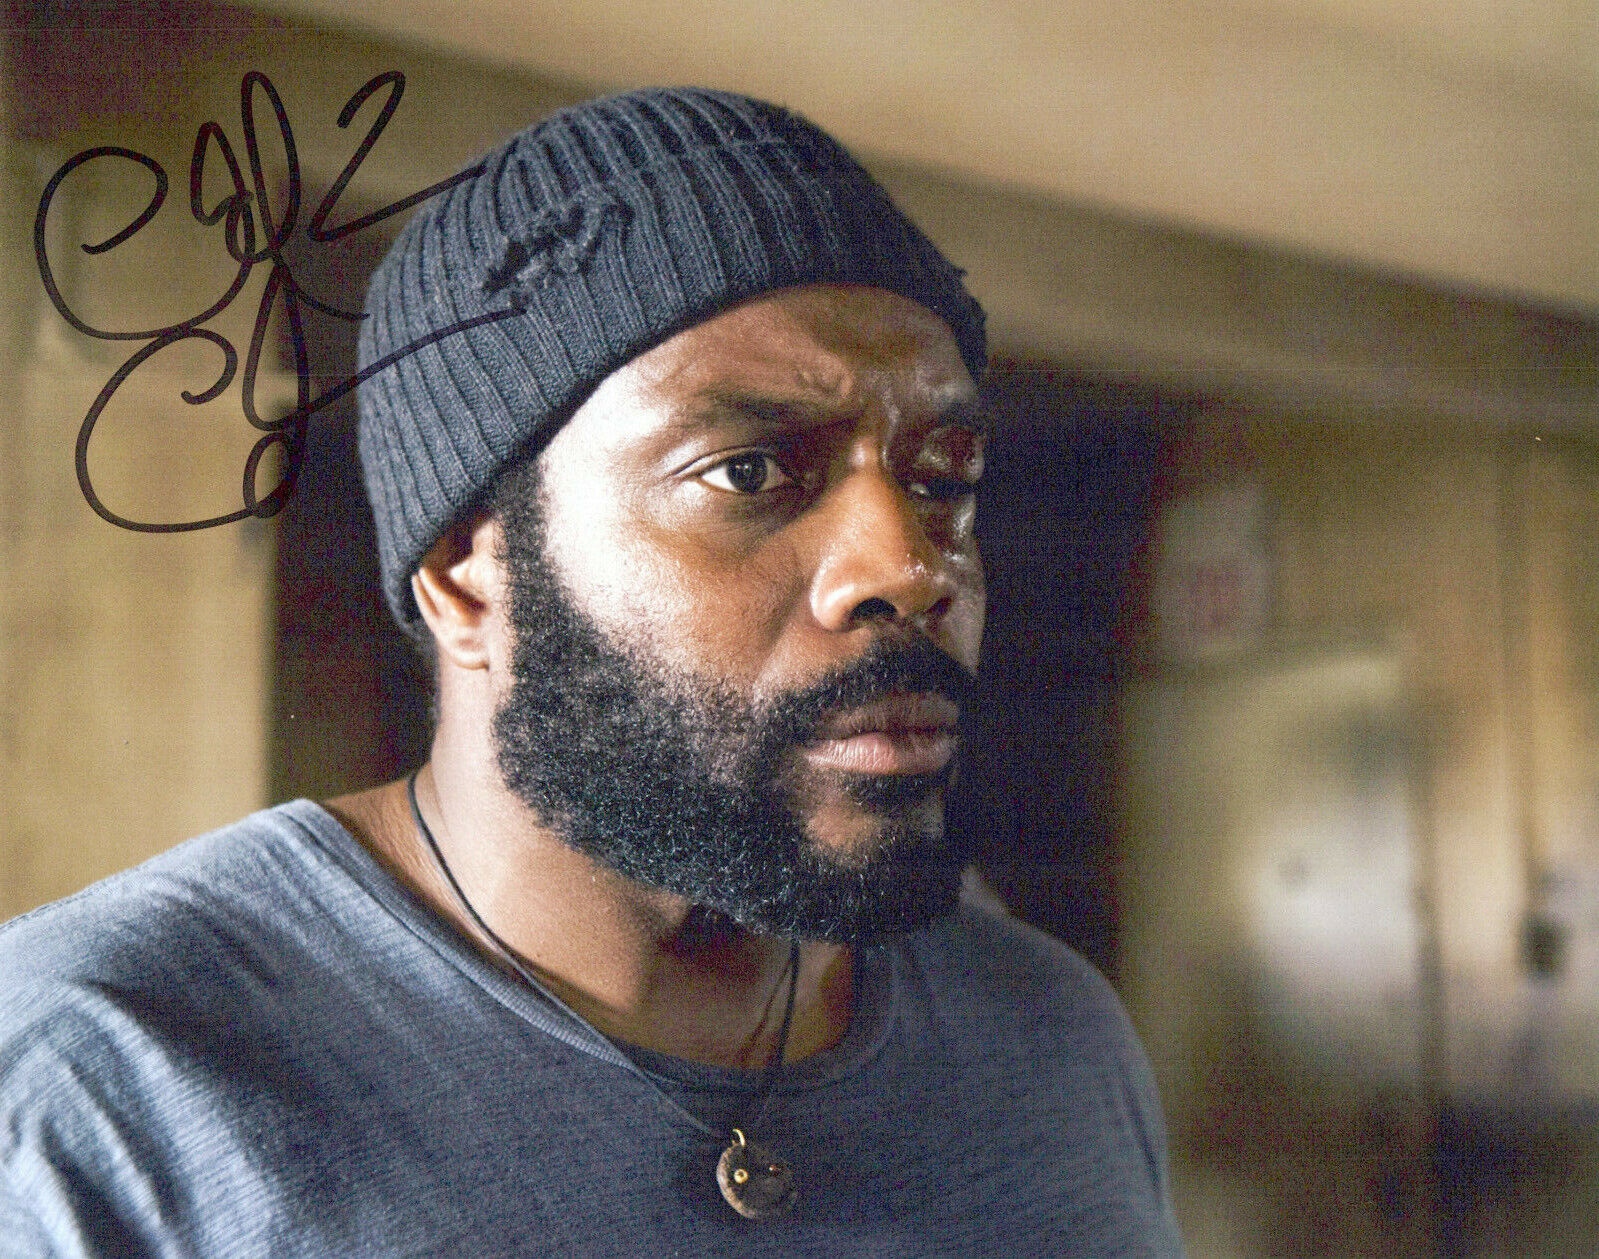 Chad L Coleman The Walking Dead autographed Photo Poster painting signed 8x10 #9 Tyreese